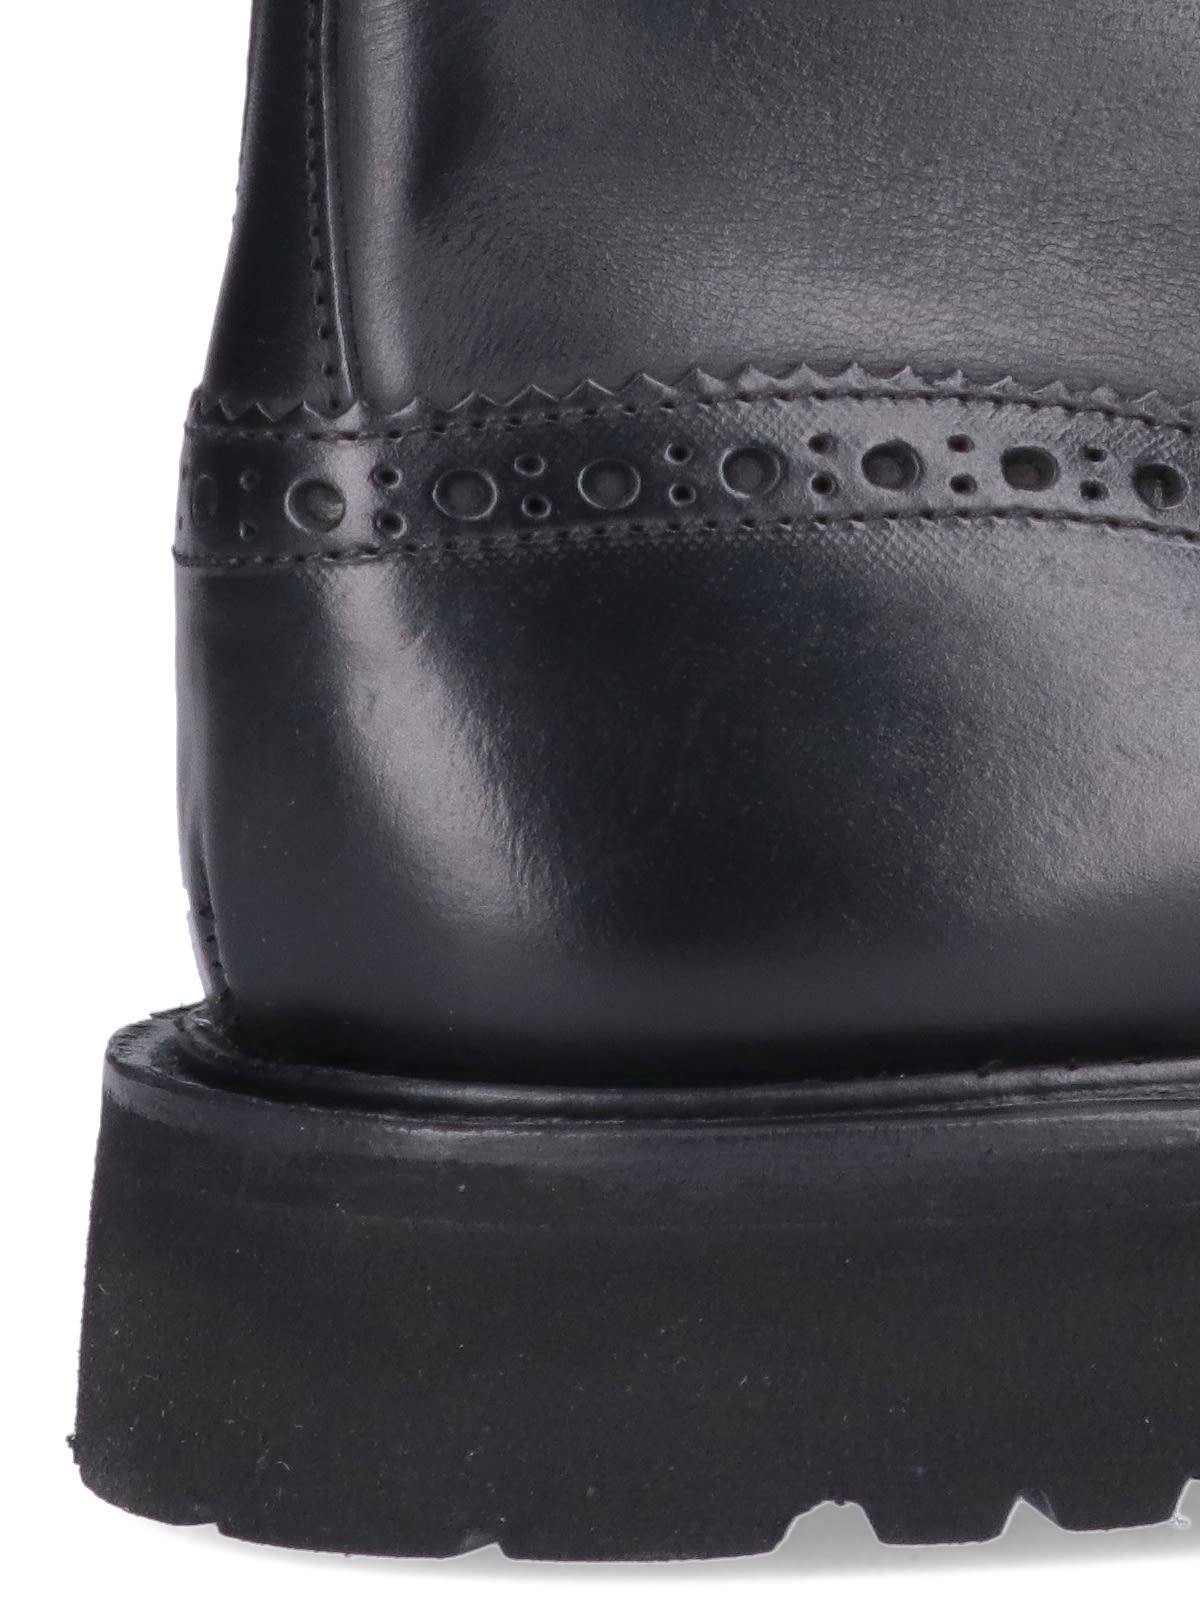 Shop Tricker's Ankle Boots Stow In Black